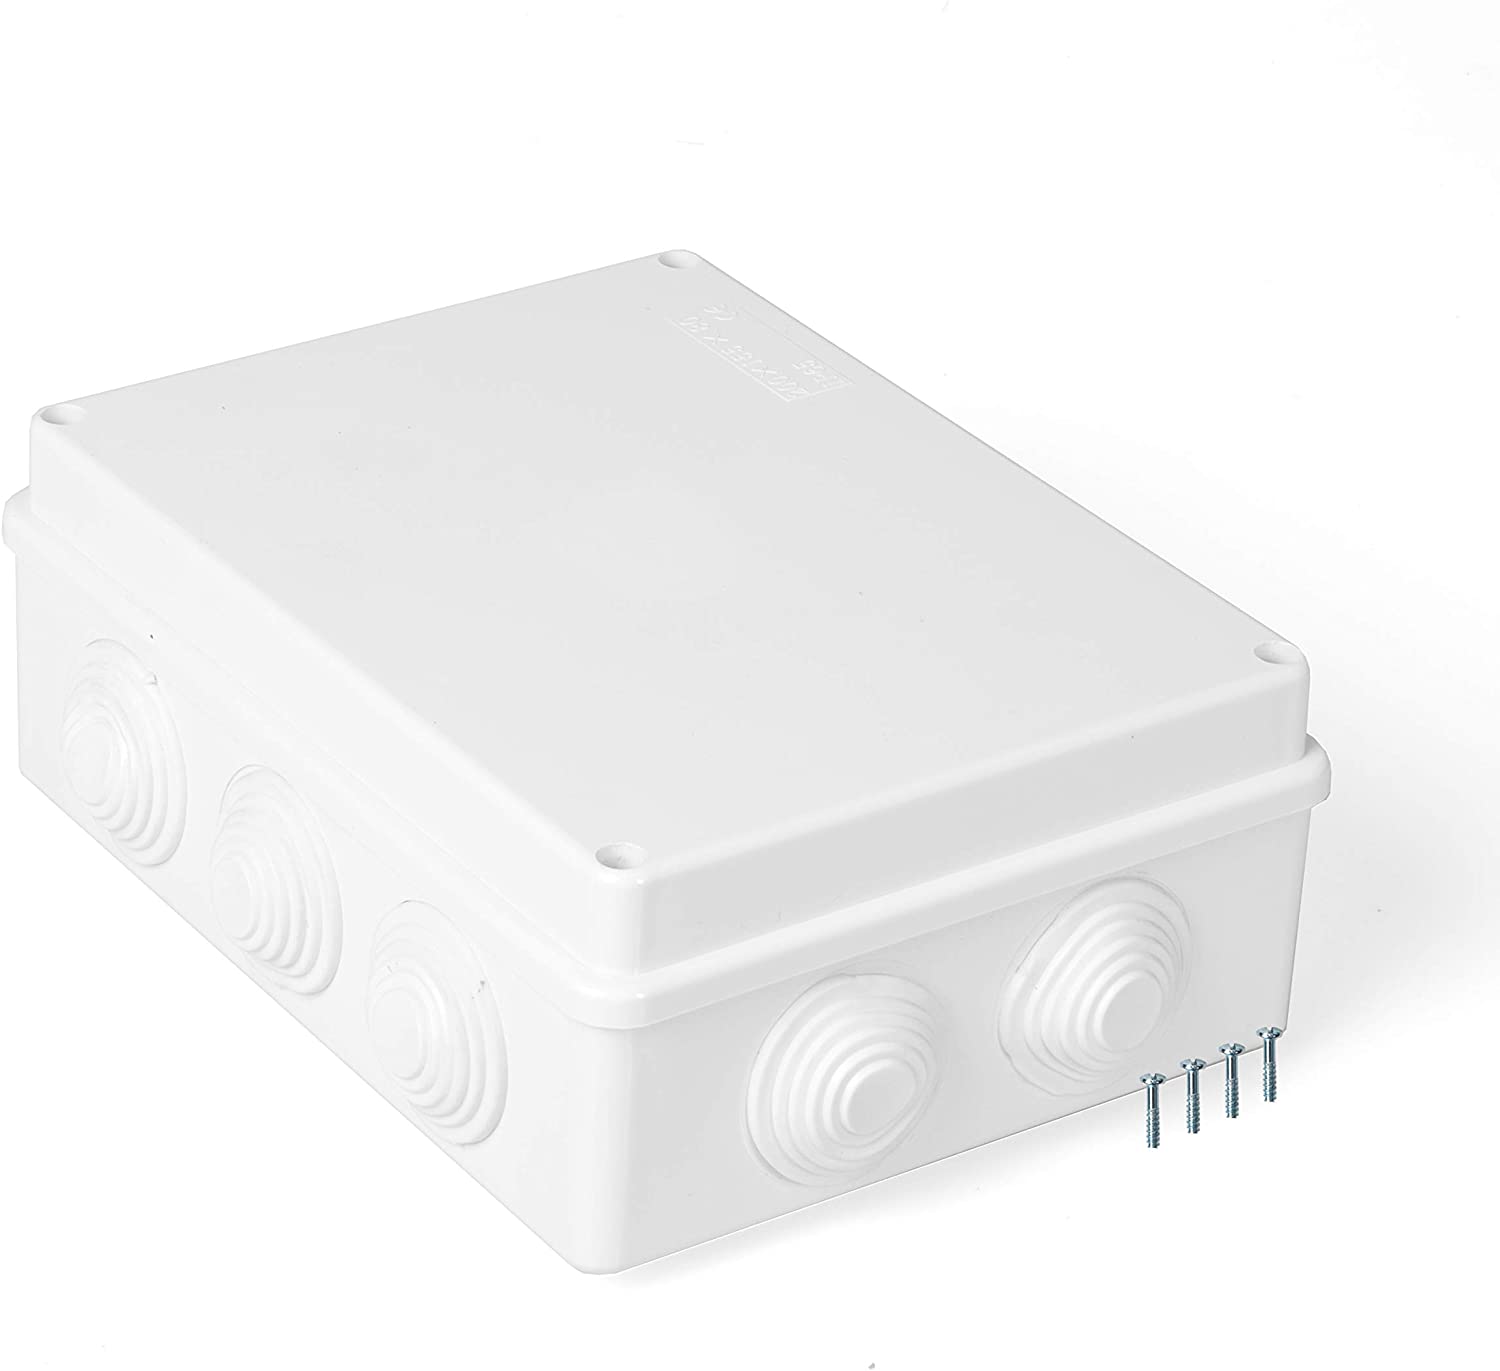 Outdoor Electrical Junction Box - 6 x 4 Inch Waterproof Plastic Box with Cover for Electronics